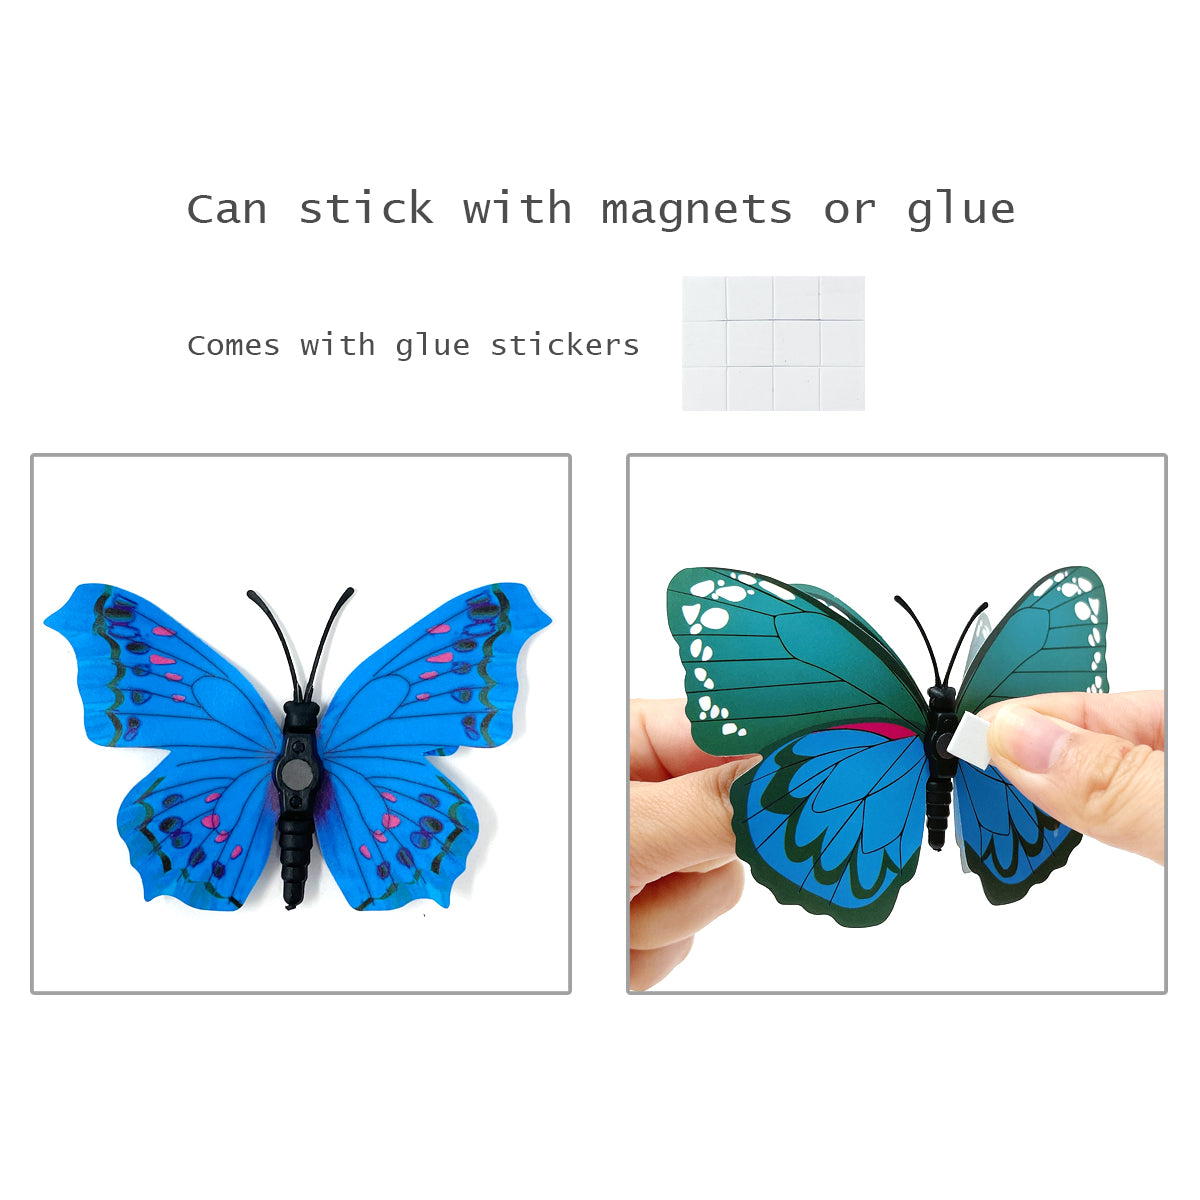 Wrapables 3D Double Wings Butterfly Decorative Wall Decor Stickers, Decals for Bedroom (24 pcs)